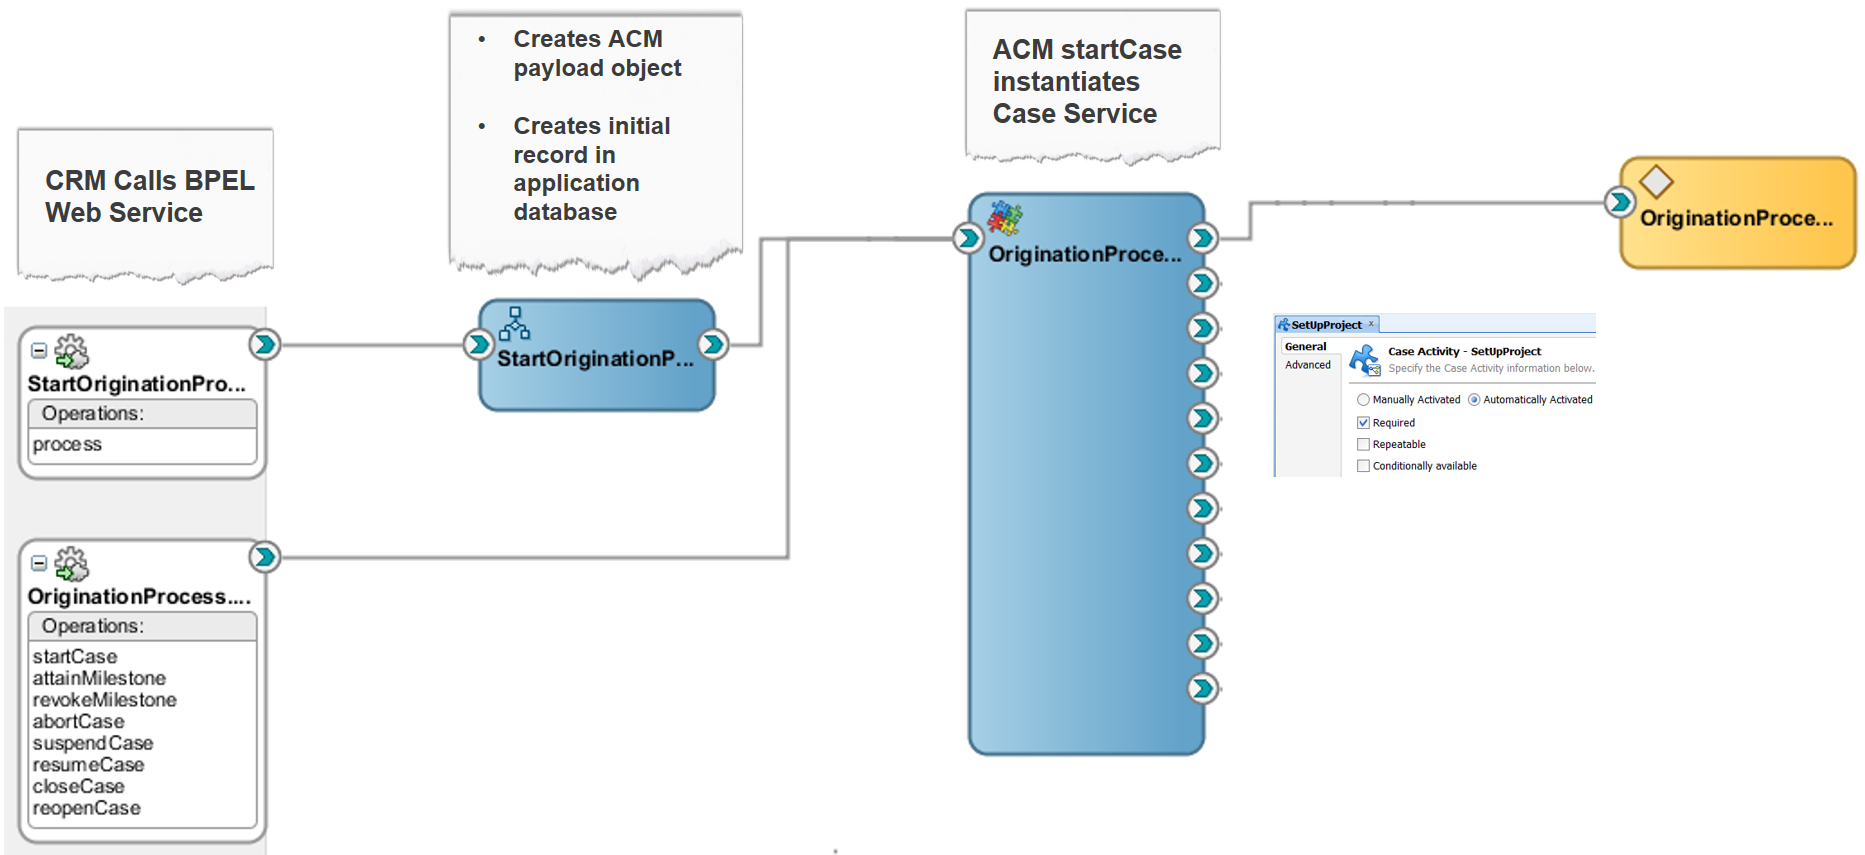 a prototypical ACM example to review the high-level steps